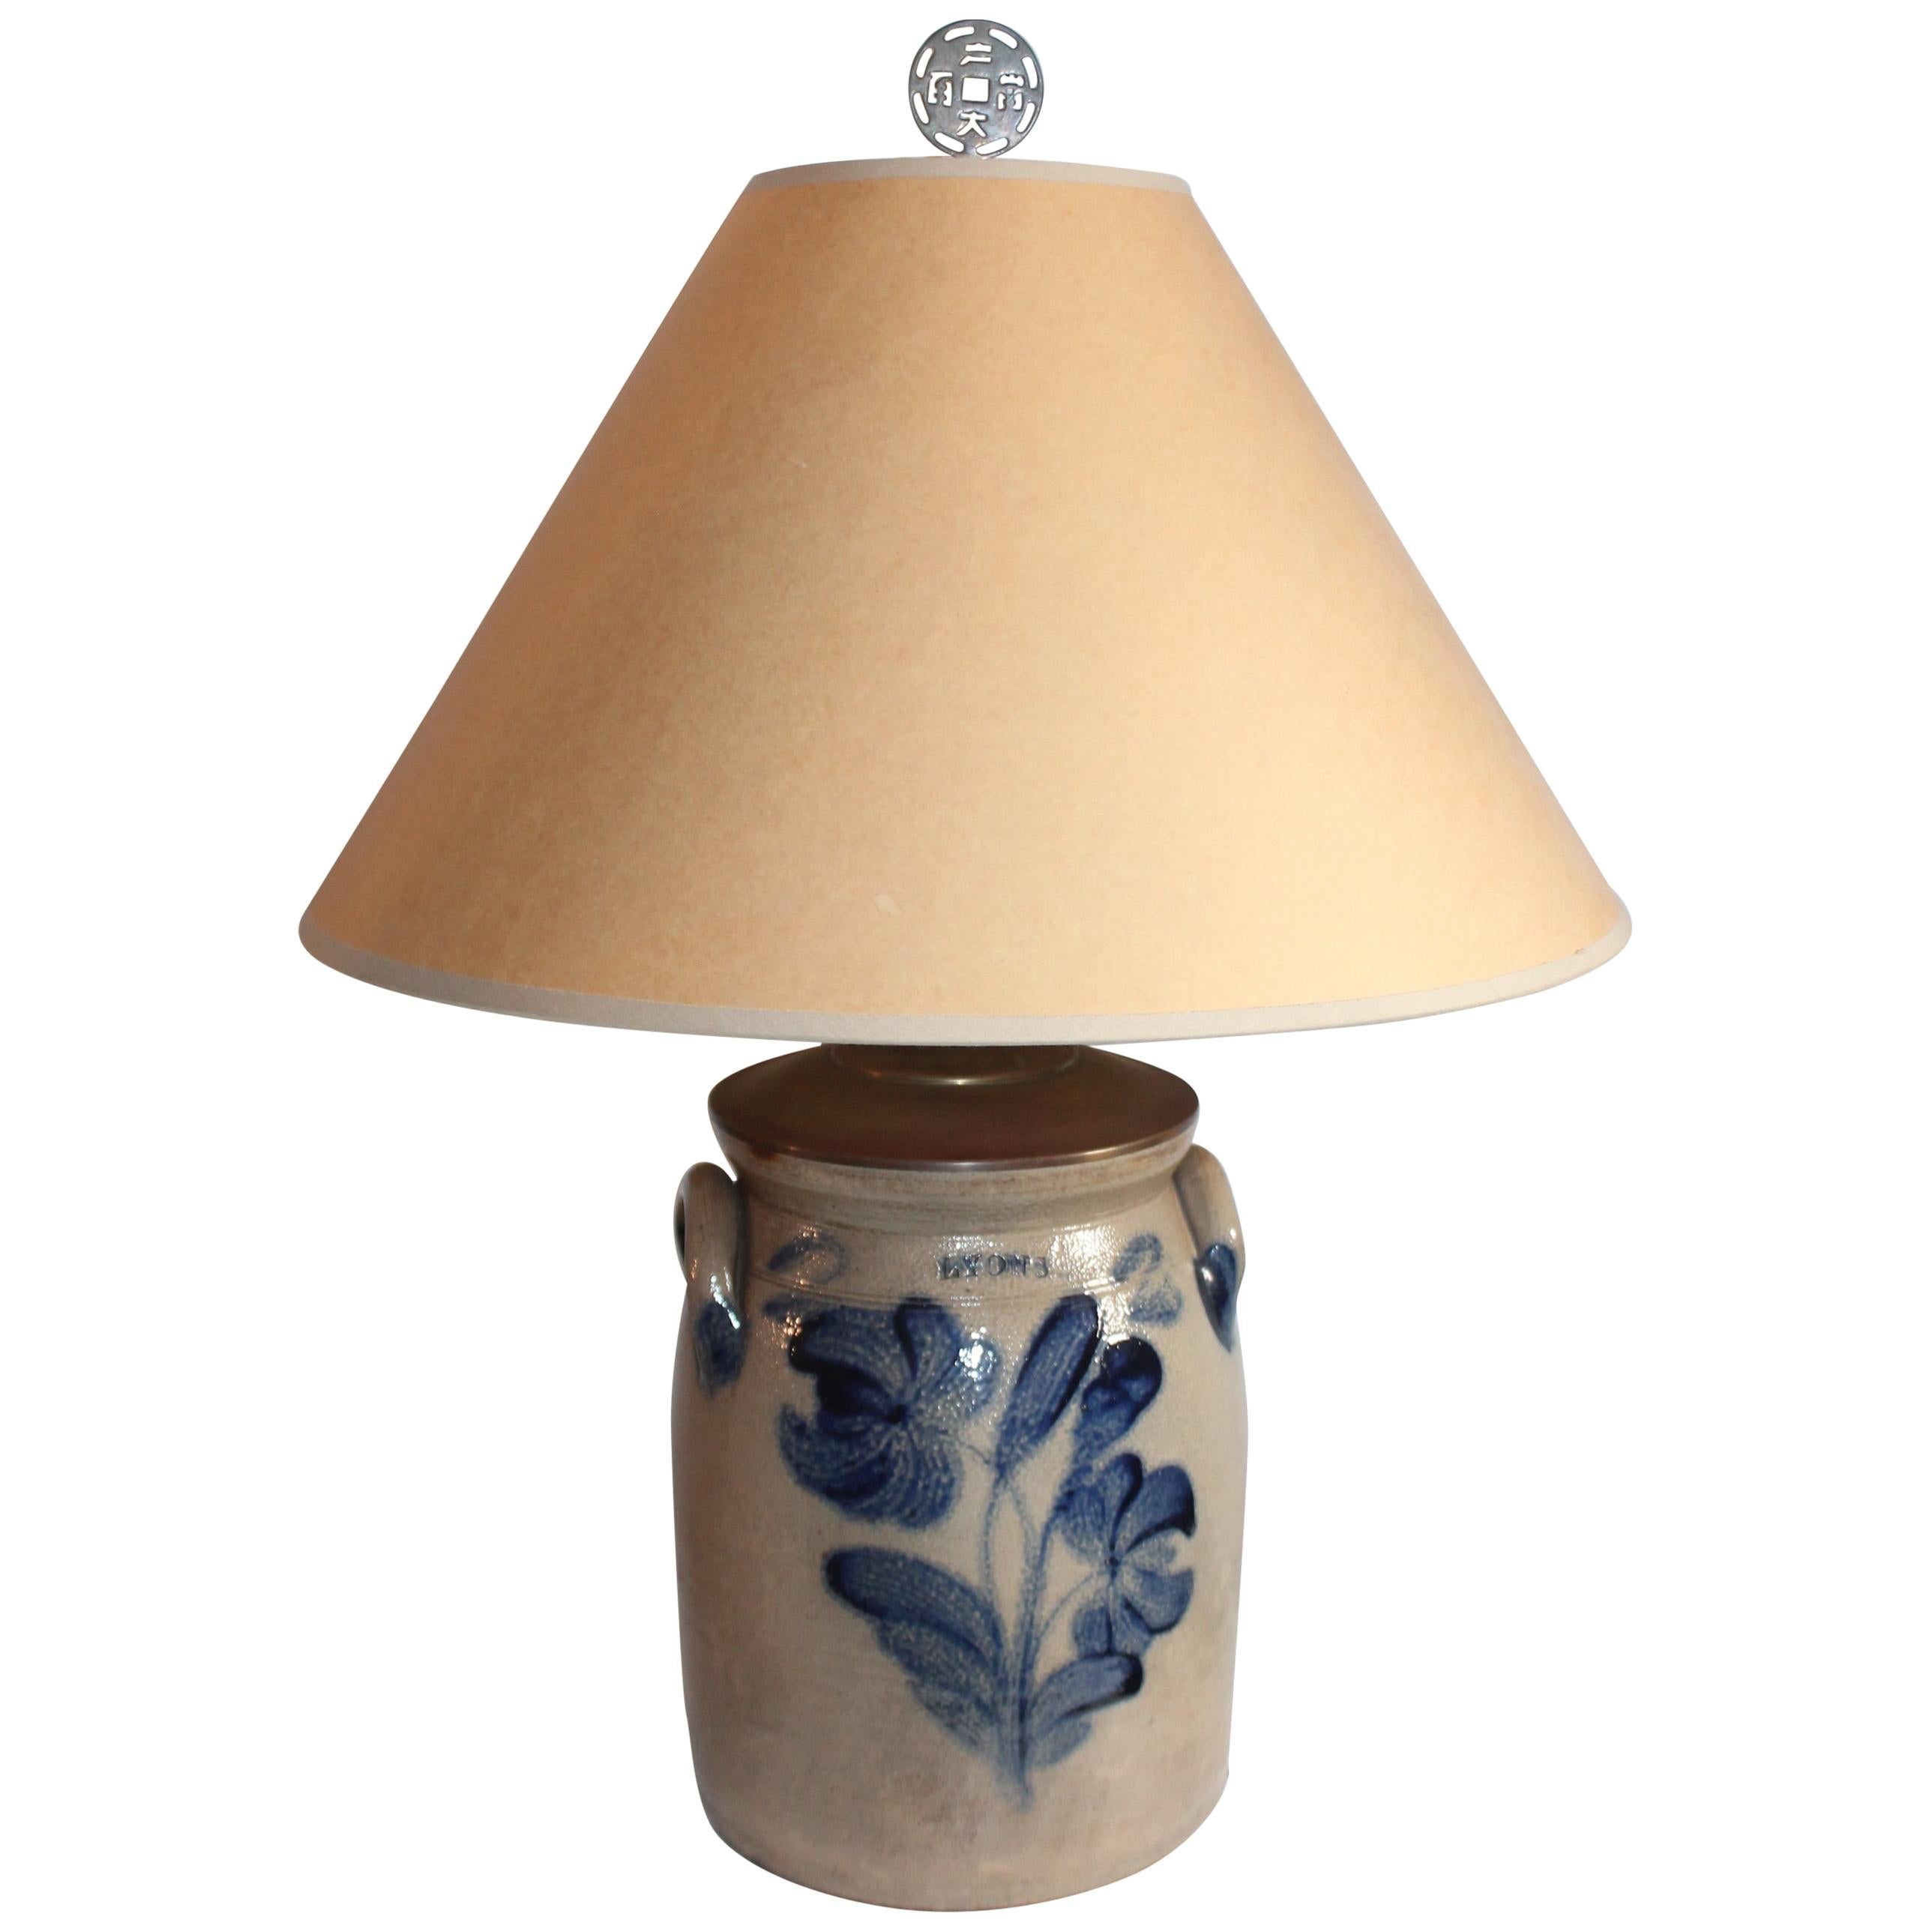 19th Century Decorated Stoneware Crock Lamp For Sale